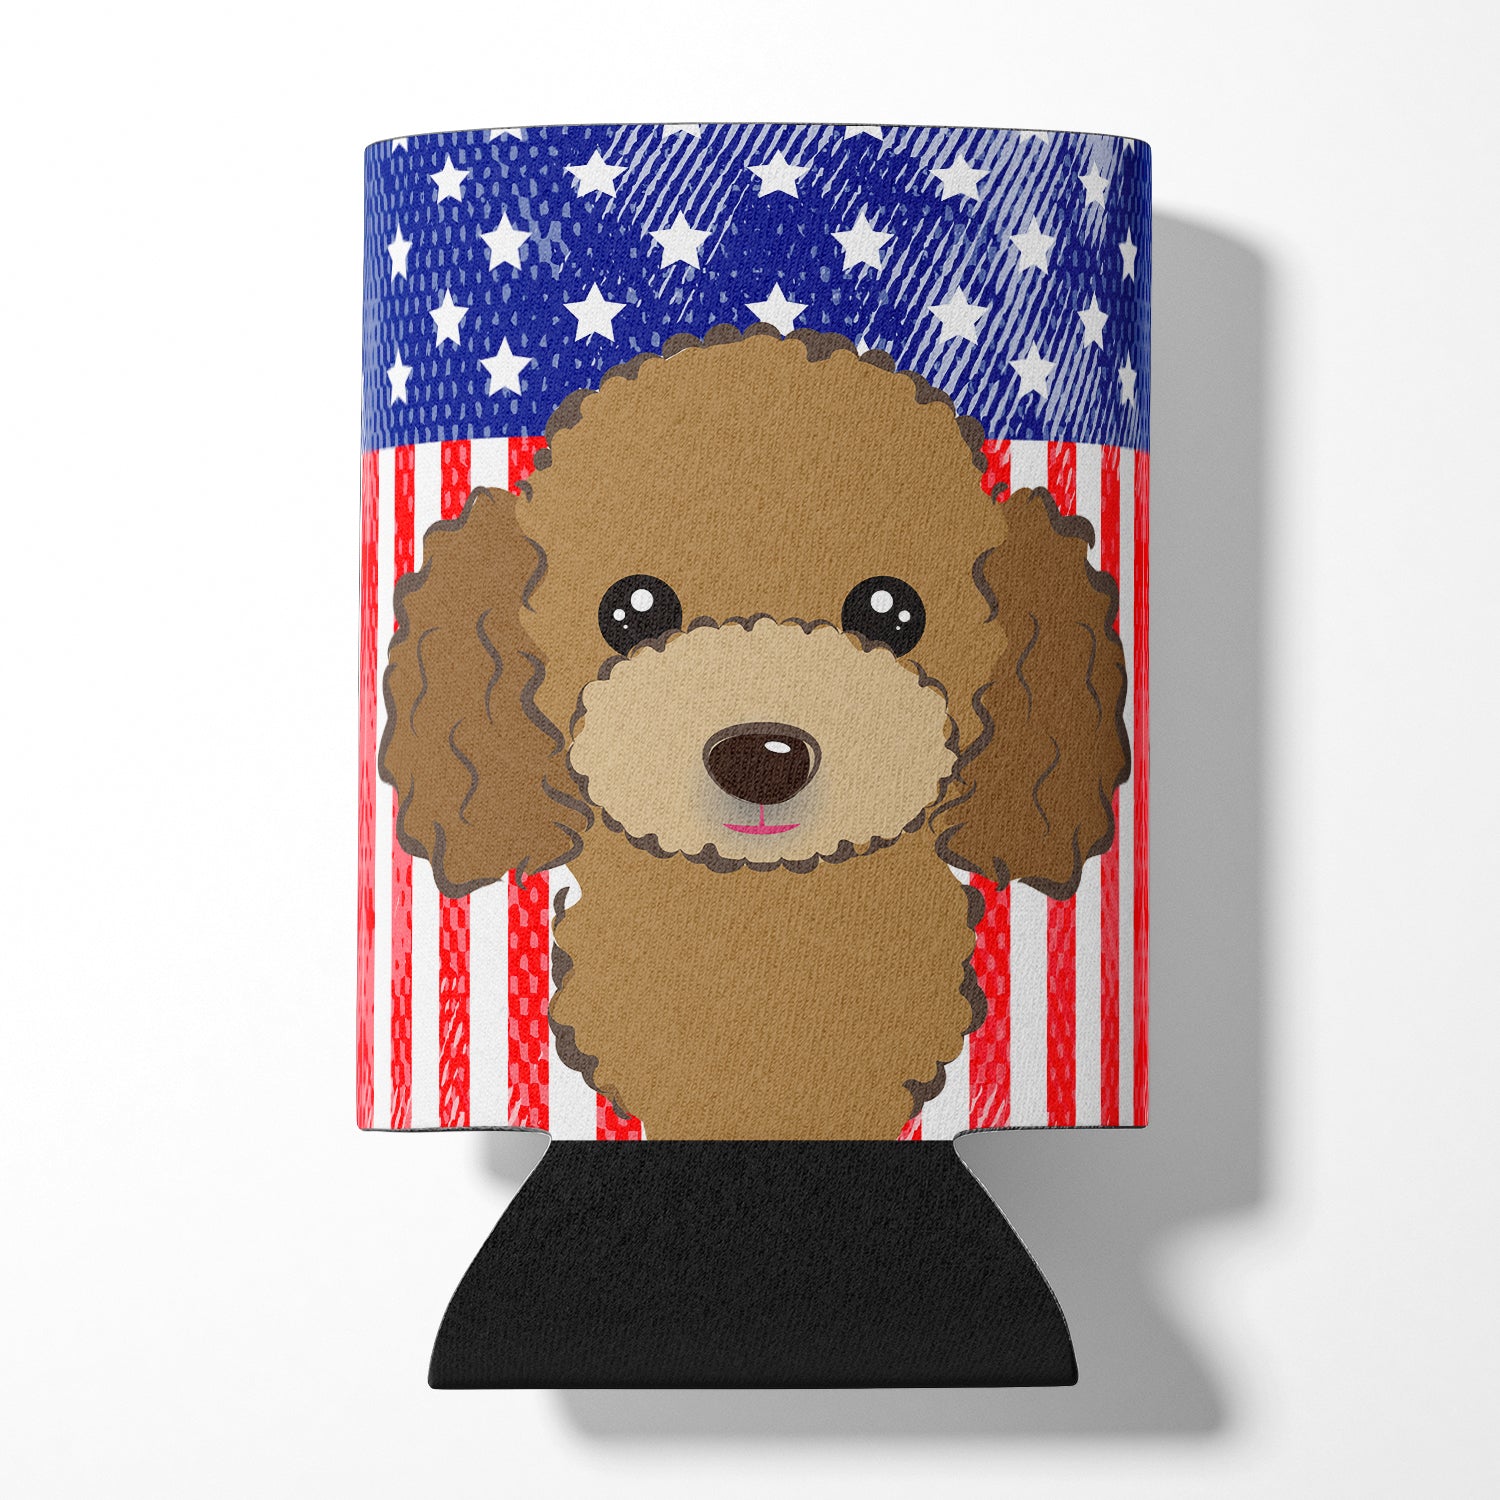 American Flag and Chocolate Brown Poodle Can or Bottle Hugger BB2186CC